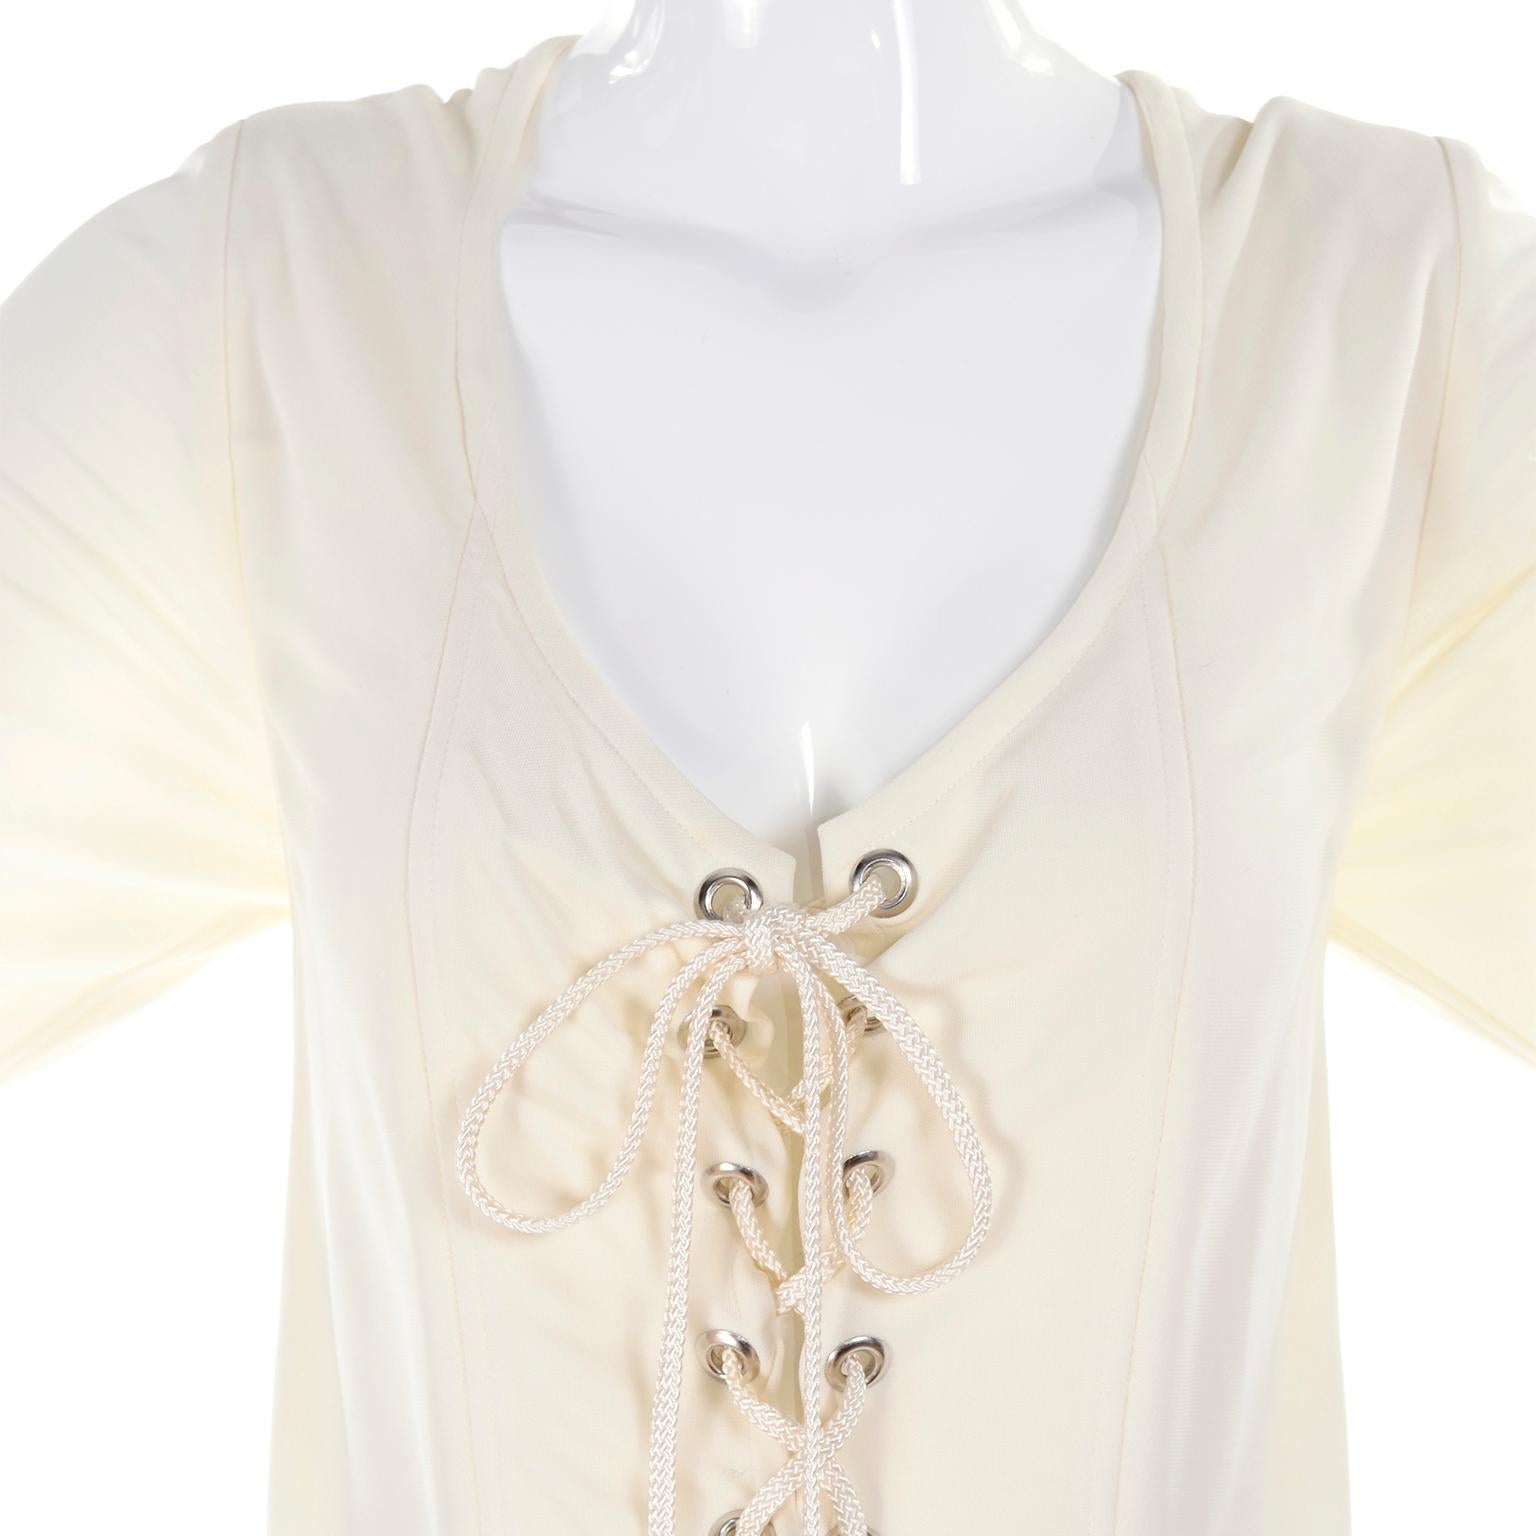 Gray Yves Saint Laurent Top YSL Rive Gauche Lace Up Blouse in Cream Silk Jersey 42